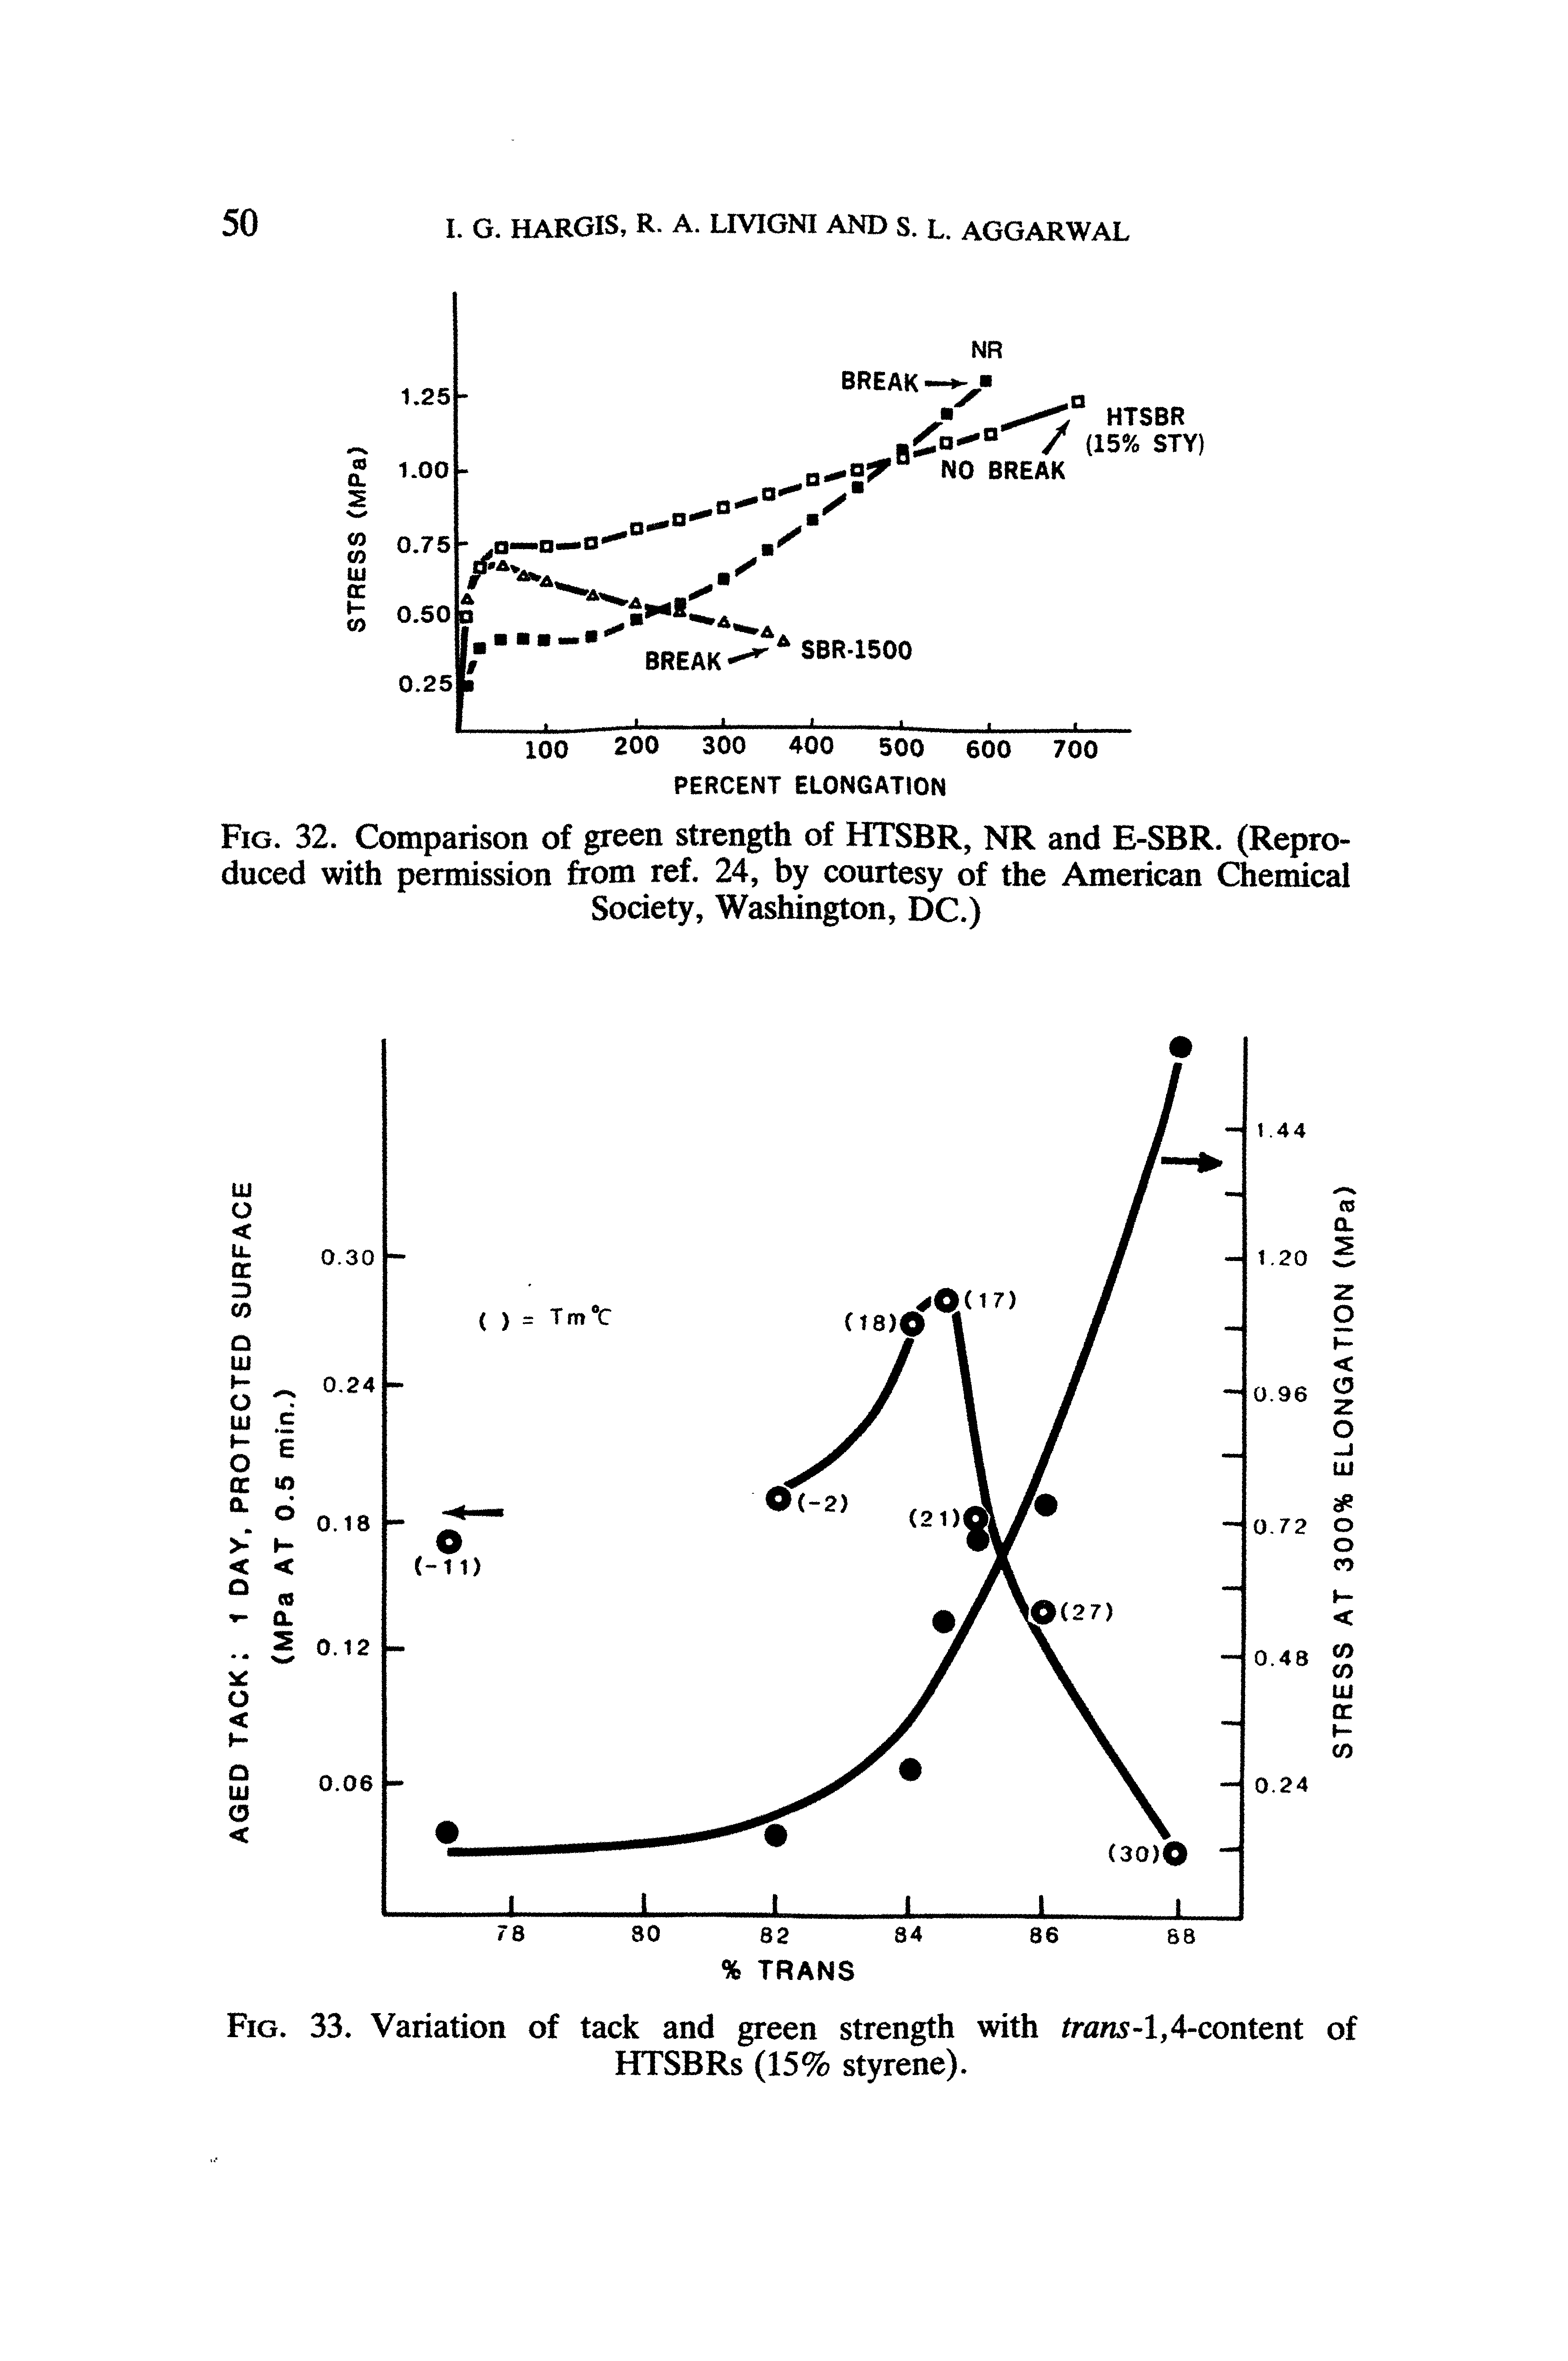 Fig. 33. Variation of tack and green strength with /ru 5-l,4-content of HTSBRs (15% styrene).